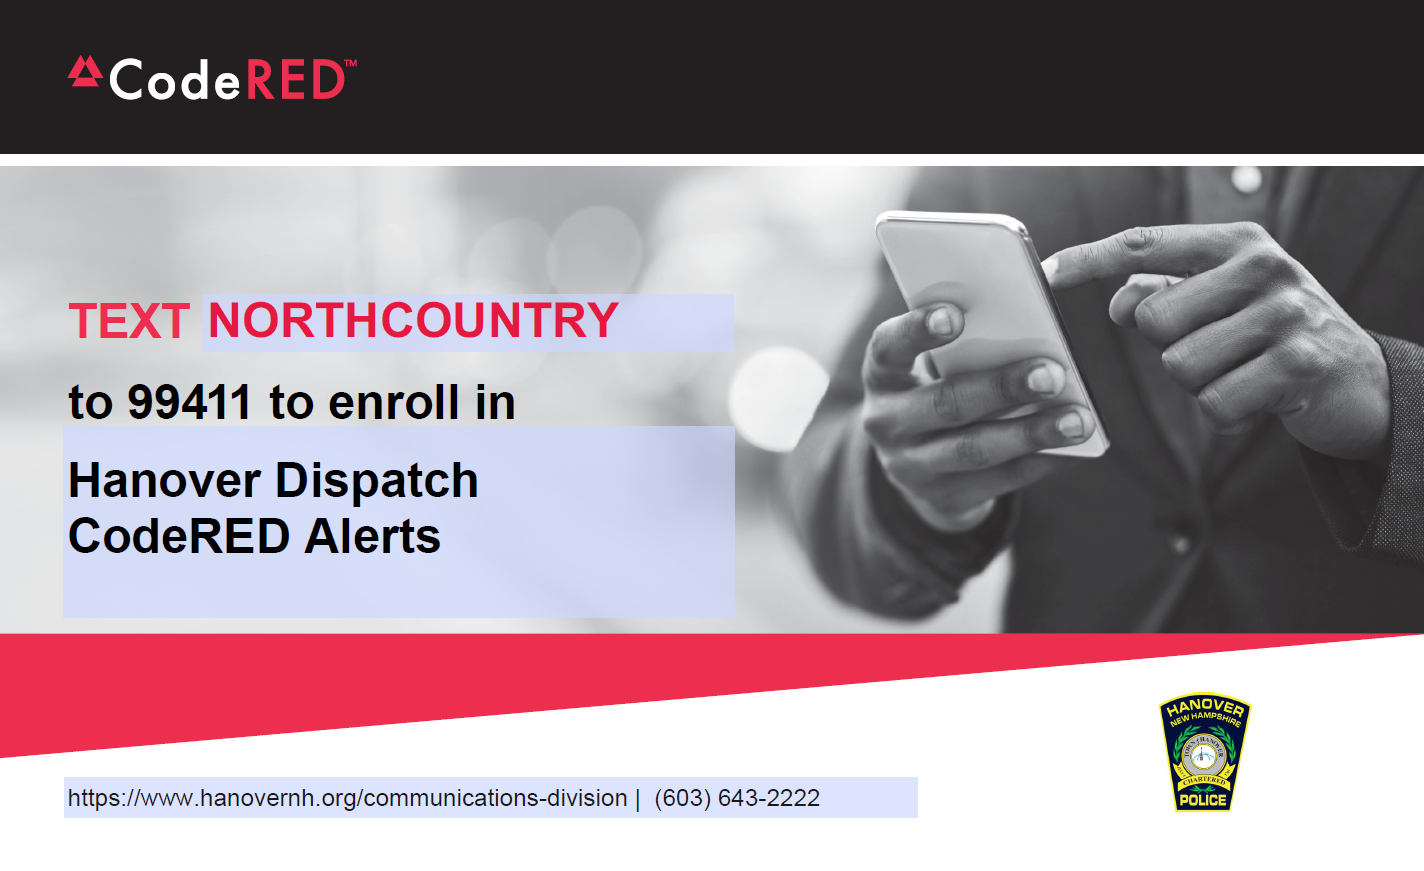 TEXT NORTHCOUNTRY to 99411 to enroll in Hanover Dispatch CodeRED Alerts